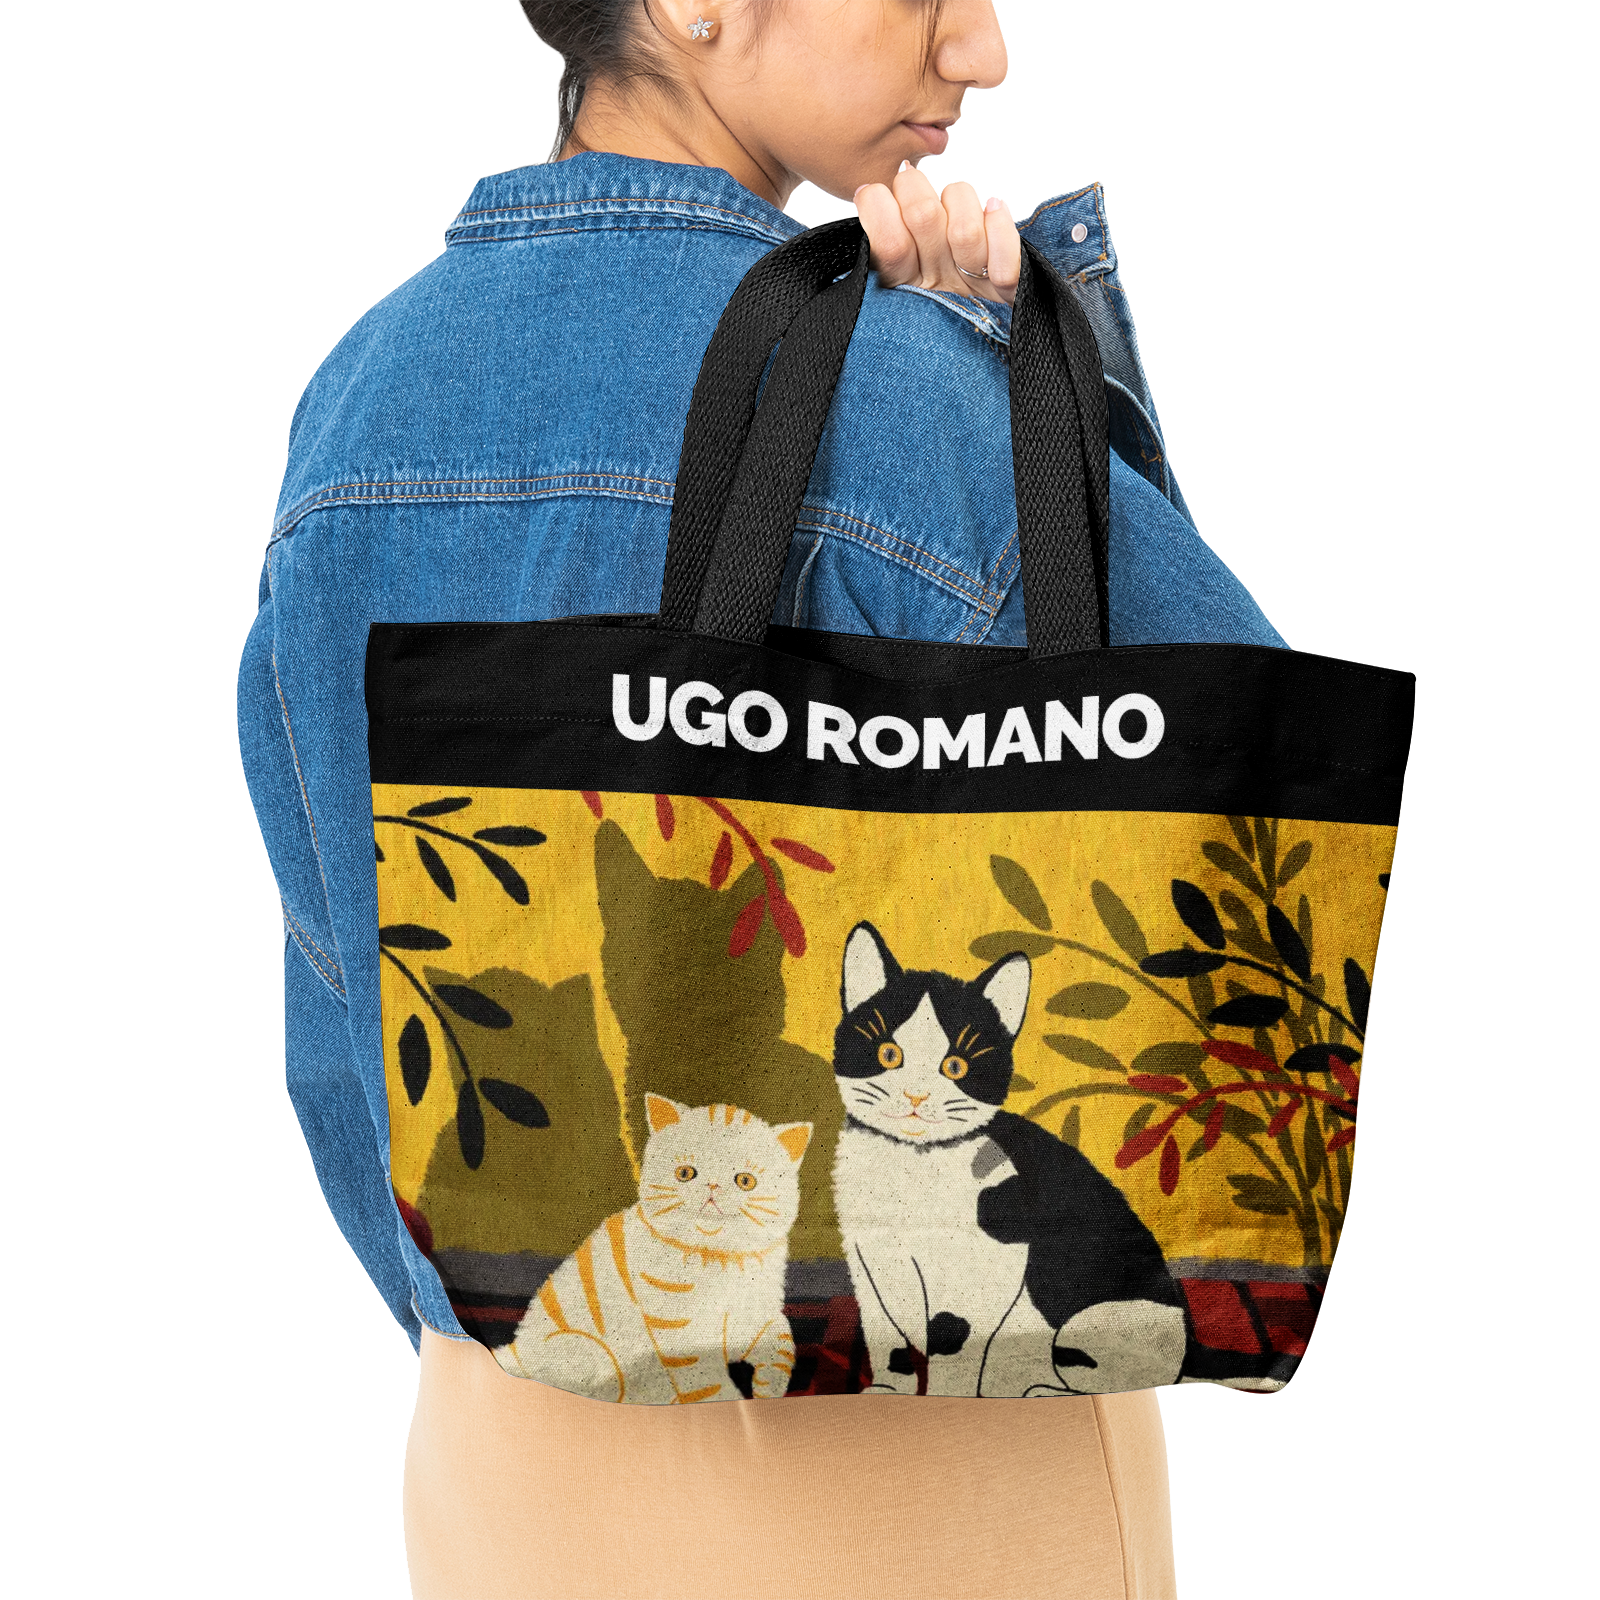 Heavy Duty and Strong Natural Cotton Canvas Tote Bag - UGO ROMANO URTB063